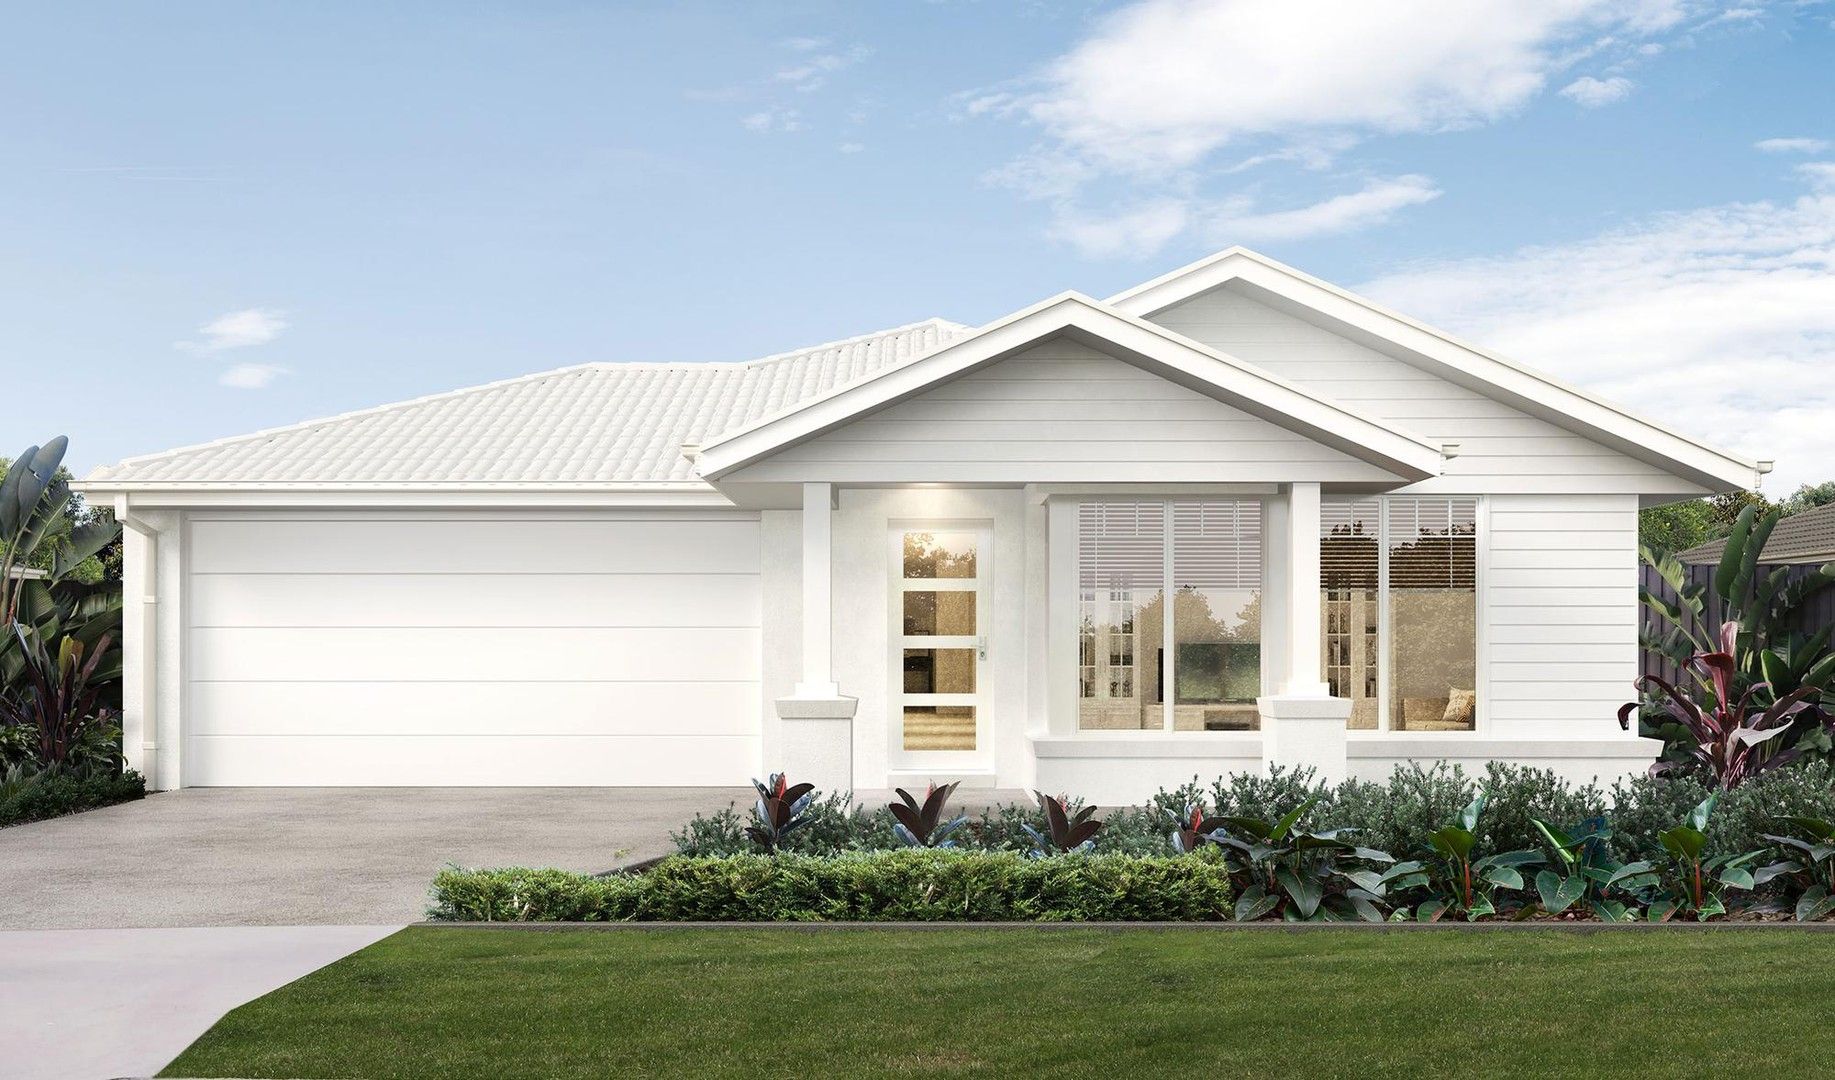 4 bedrooms New House & Land in 1478 New Road CABOOLTURE SOUTH QLD, 4510